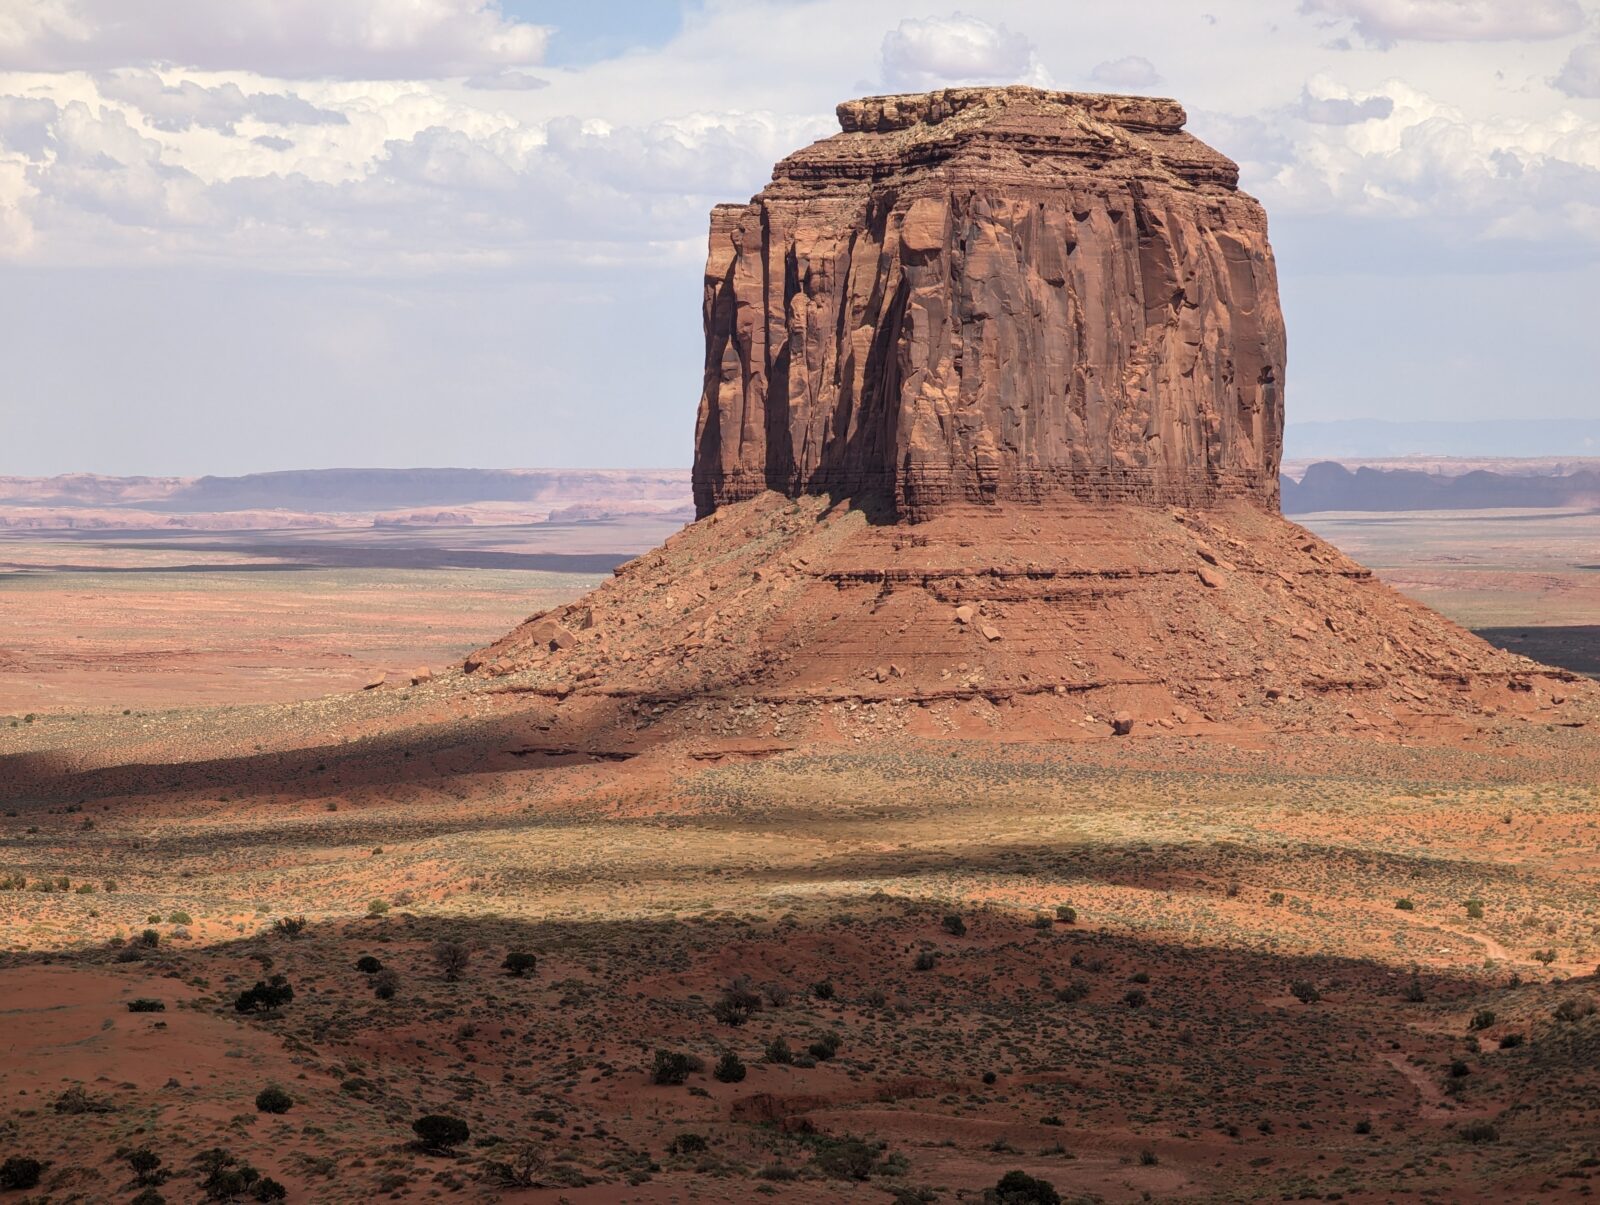 A massive rock formation standing tall, showcasing nature's grandeur and rugged beauty.